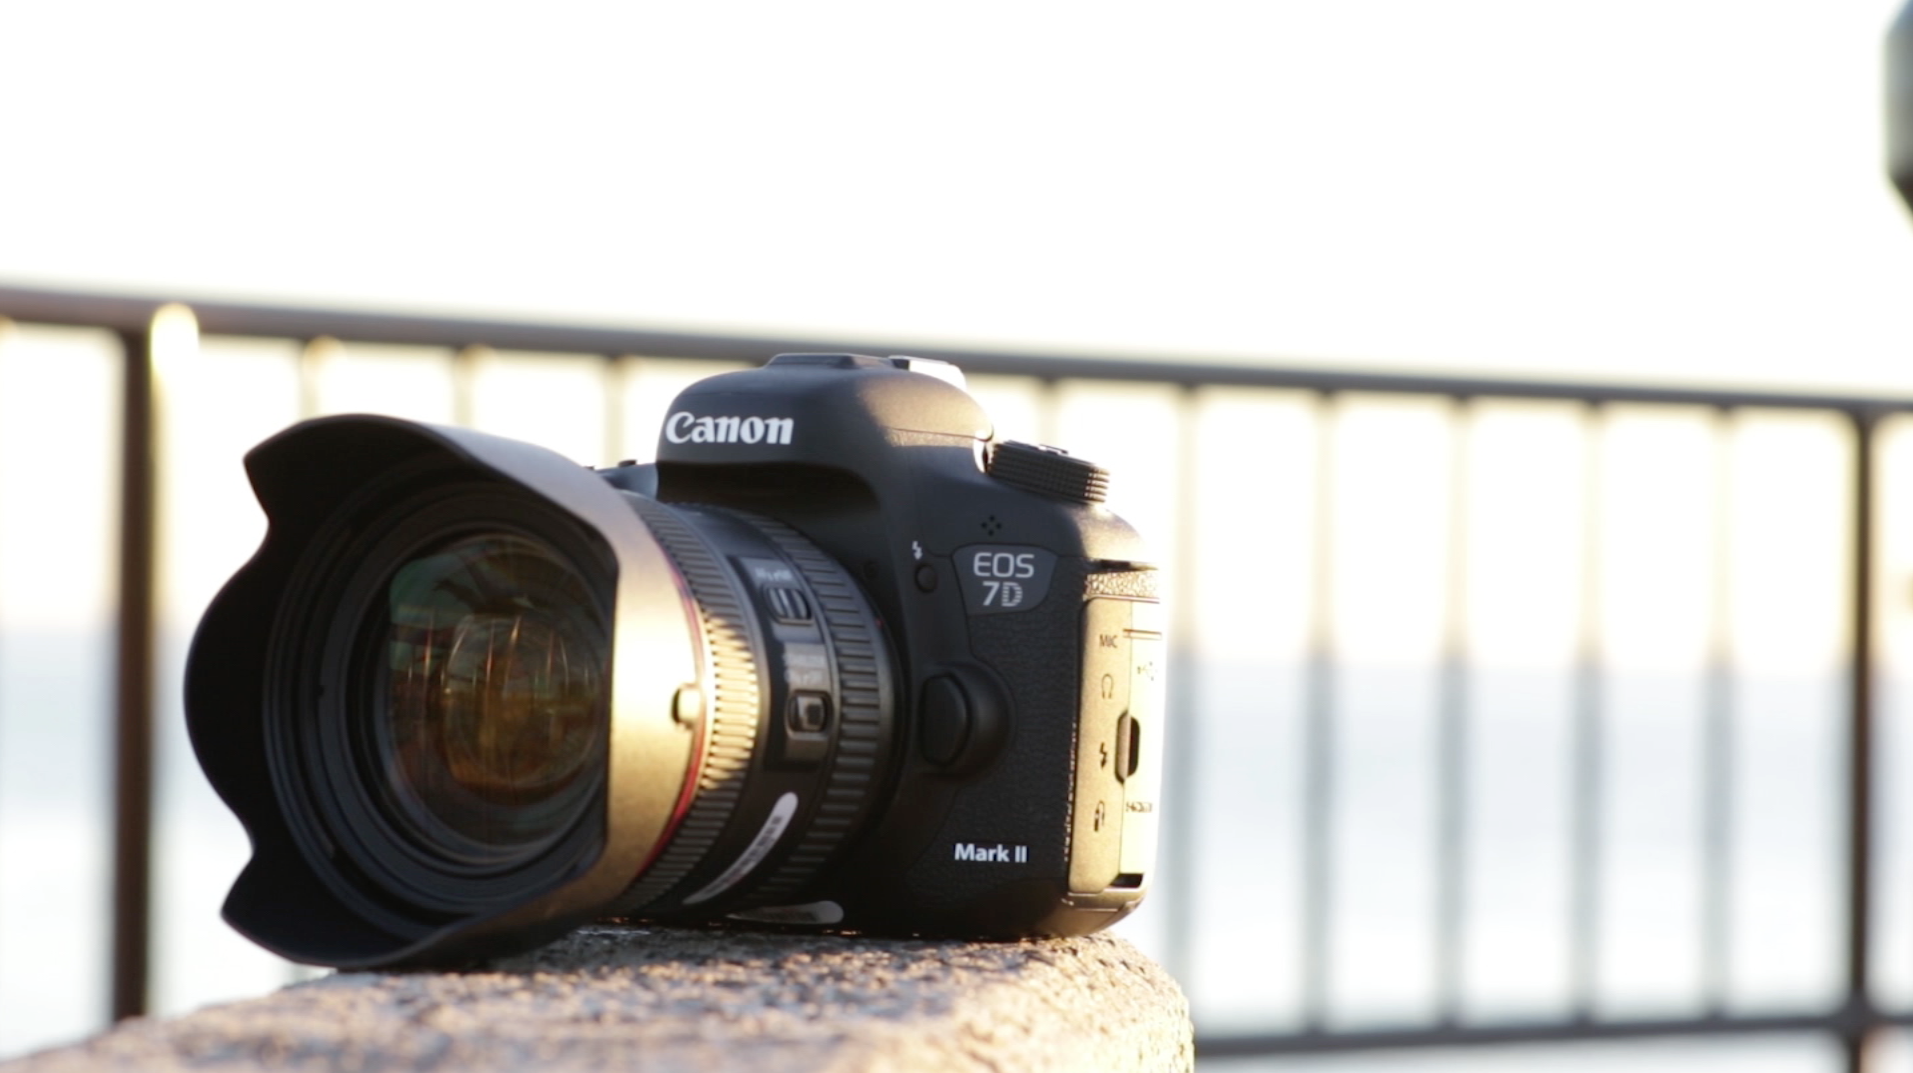 Review: The Canon 7D Mark II